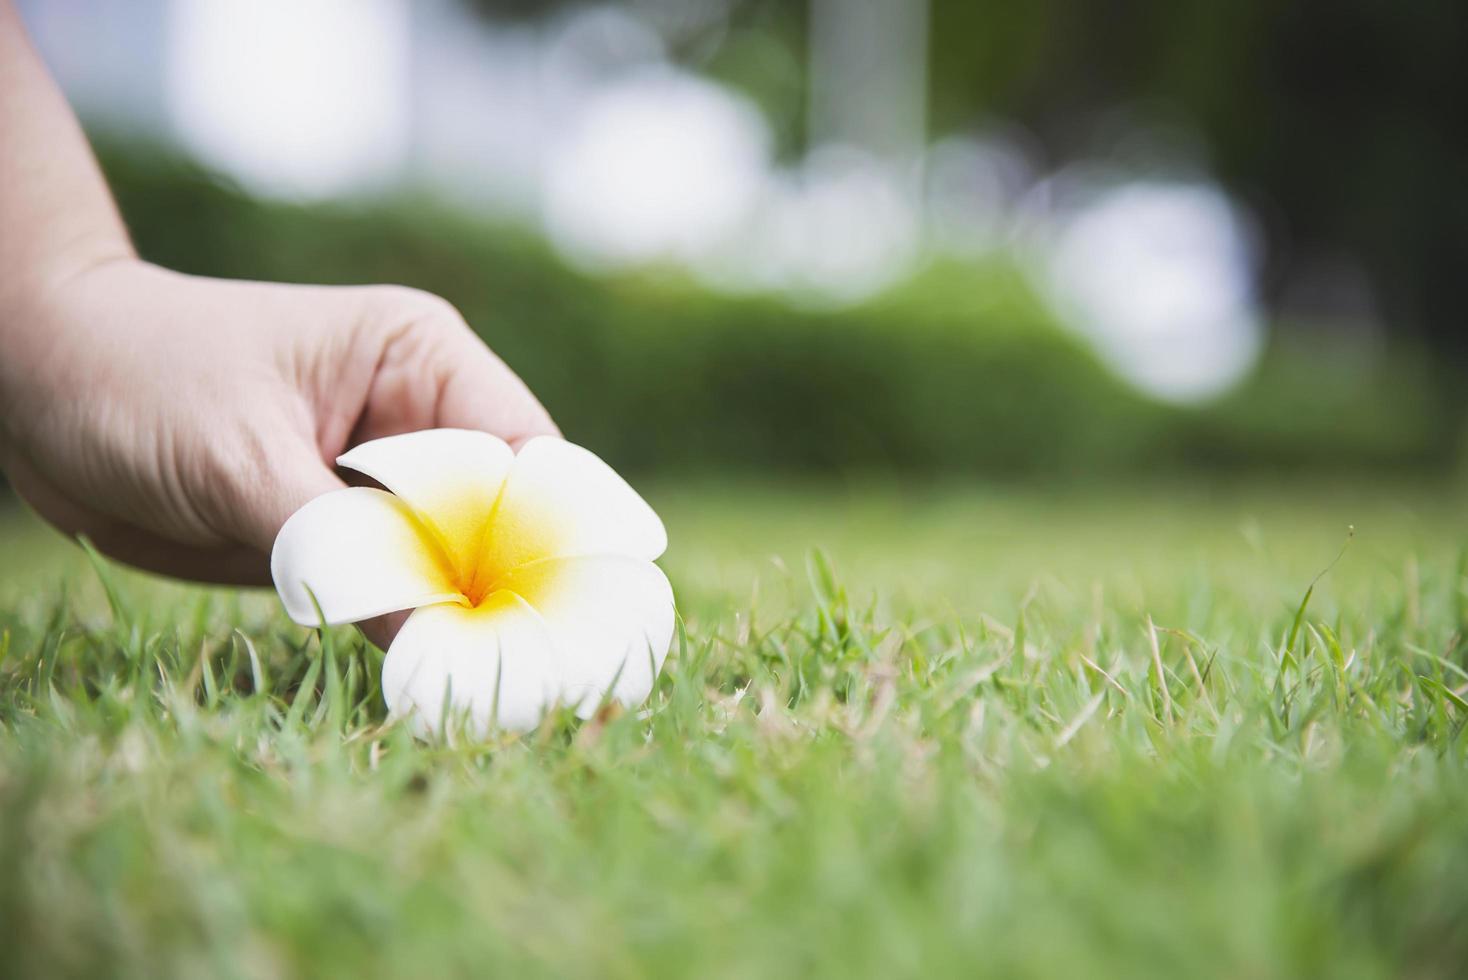 Lady hand pick plumeria flower from green grass ground - people with beautiful nature concept photo